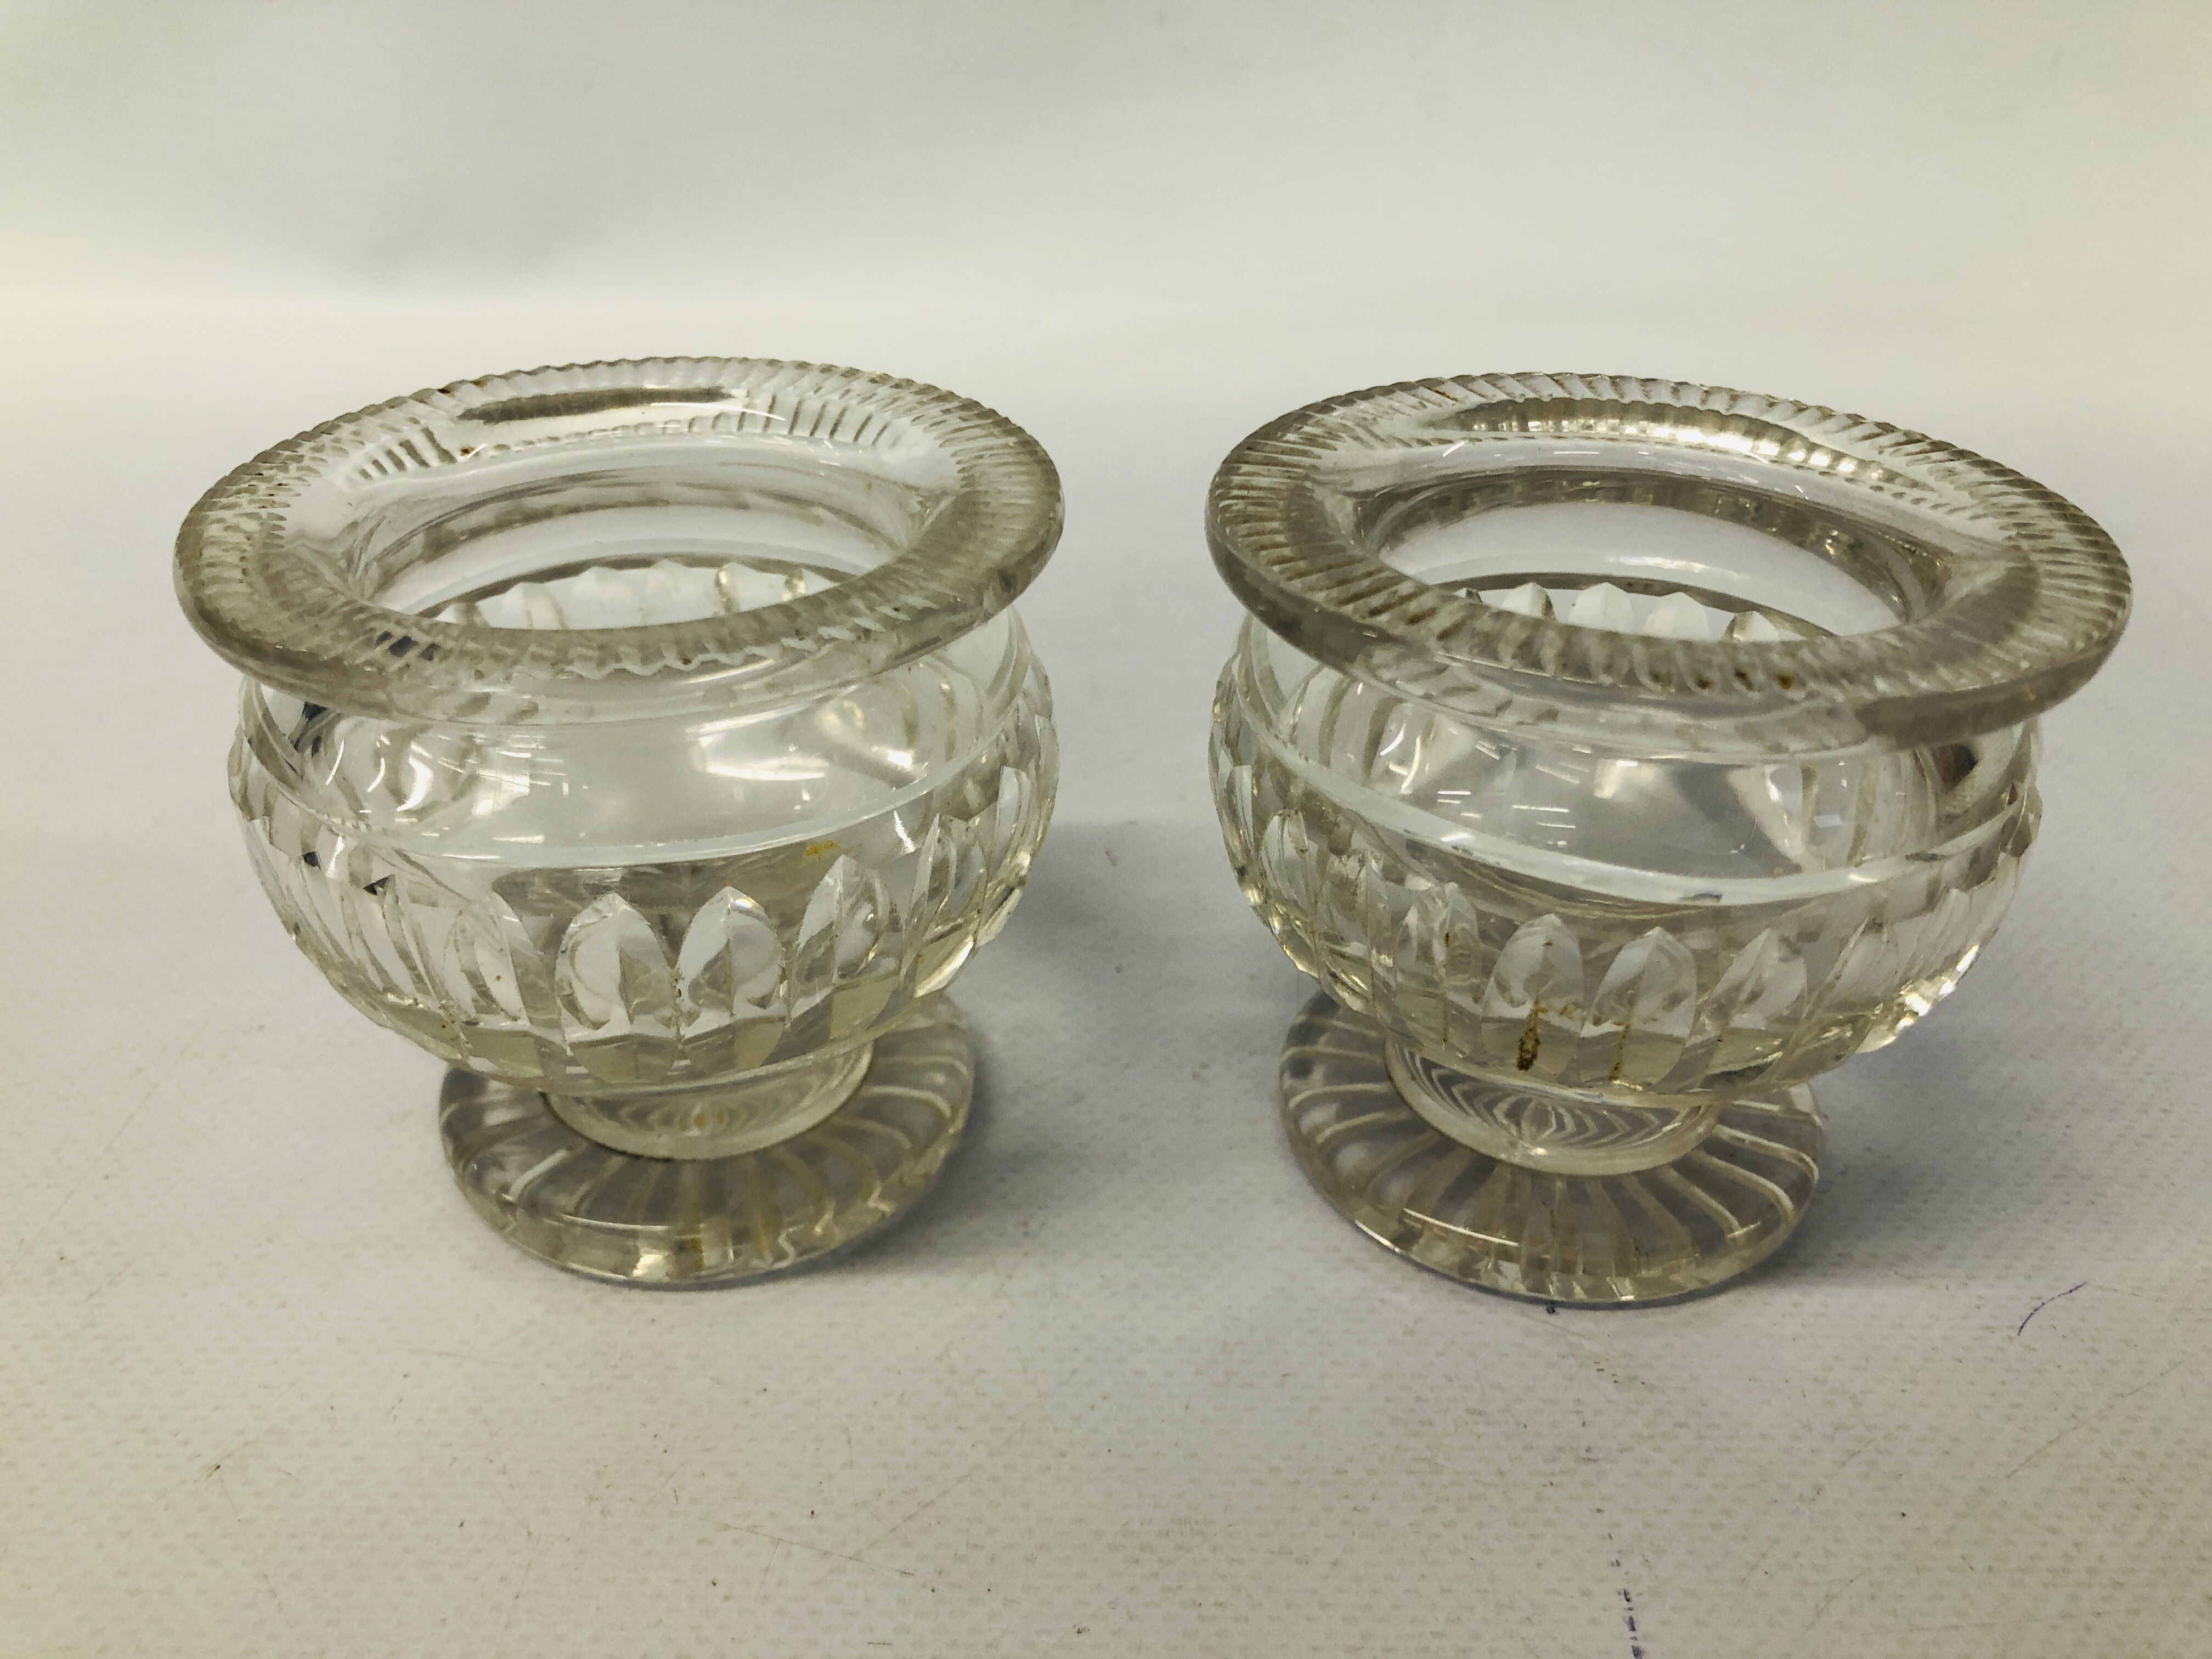 A PAIR OF C19TH GLASS CIRCULAR SALTS, ALONG WITH ANOTHER CIRCULAR SALT WITH SERRATED SIDES, - Image 5 of 5